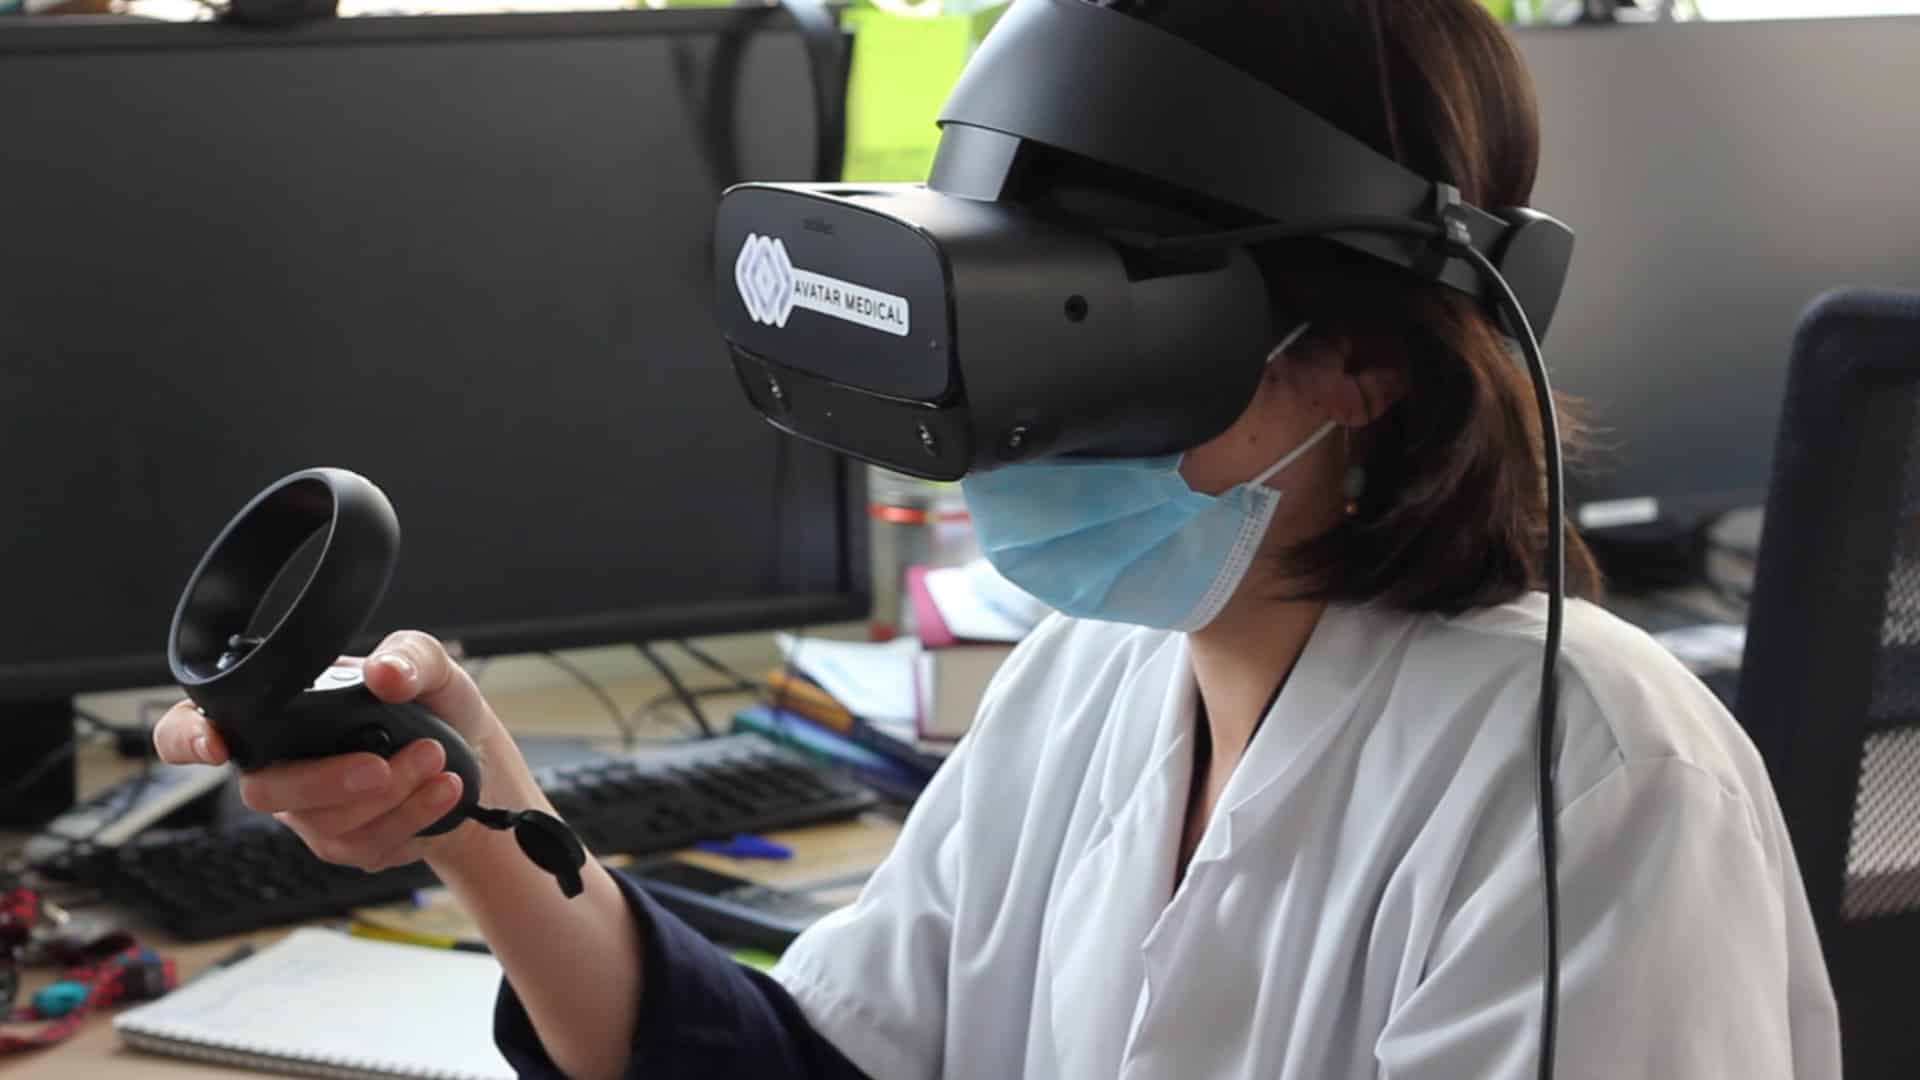 AVATAR MEDICAL - virtual reality that helps to increase our understanding of breast cancer surgery